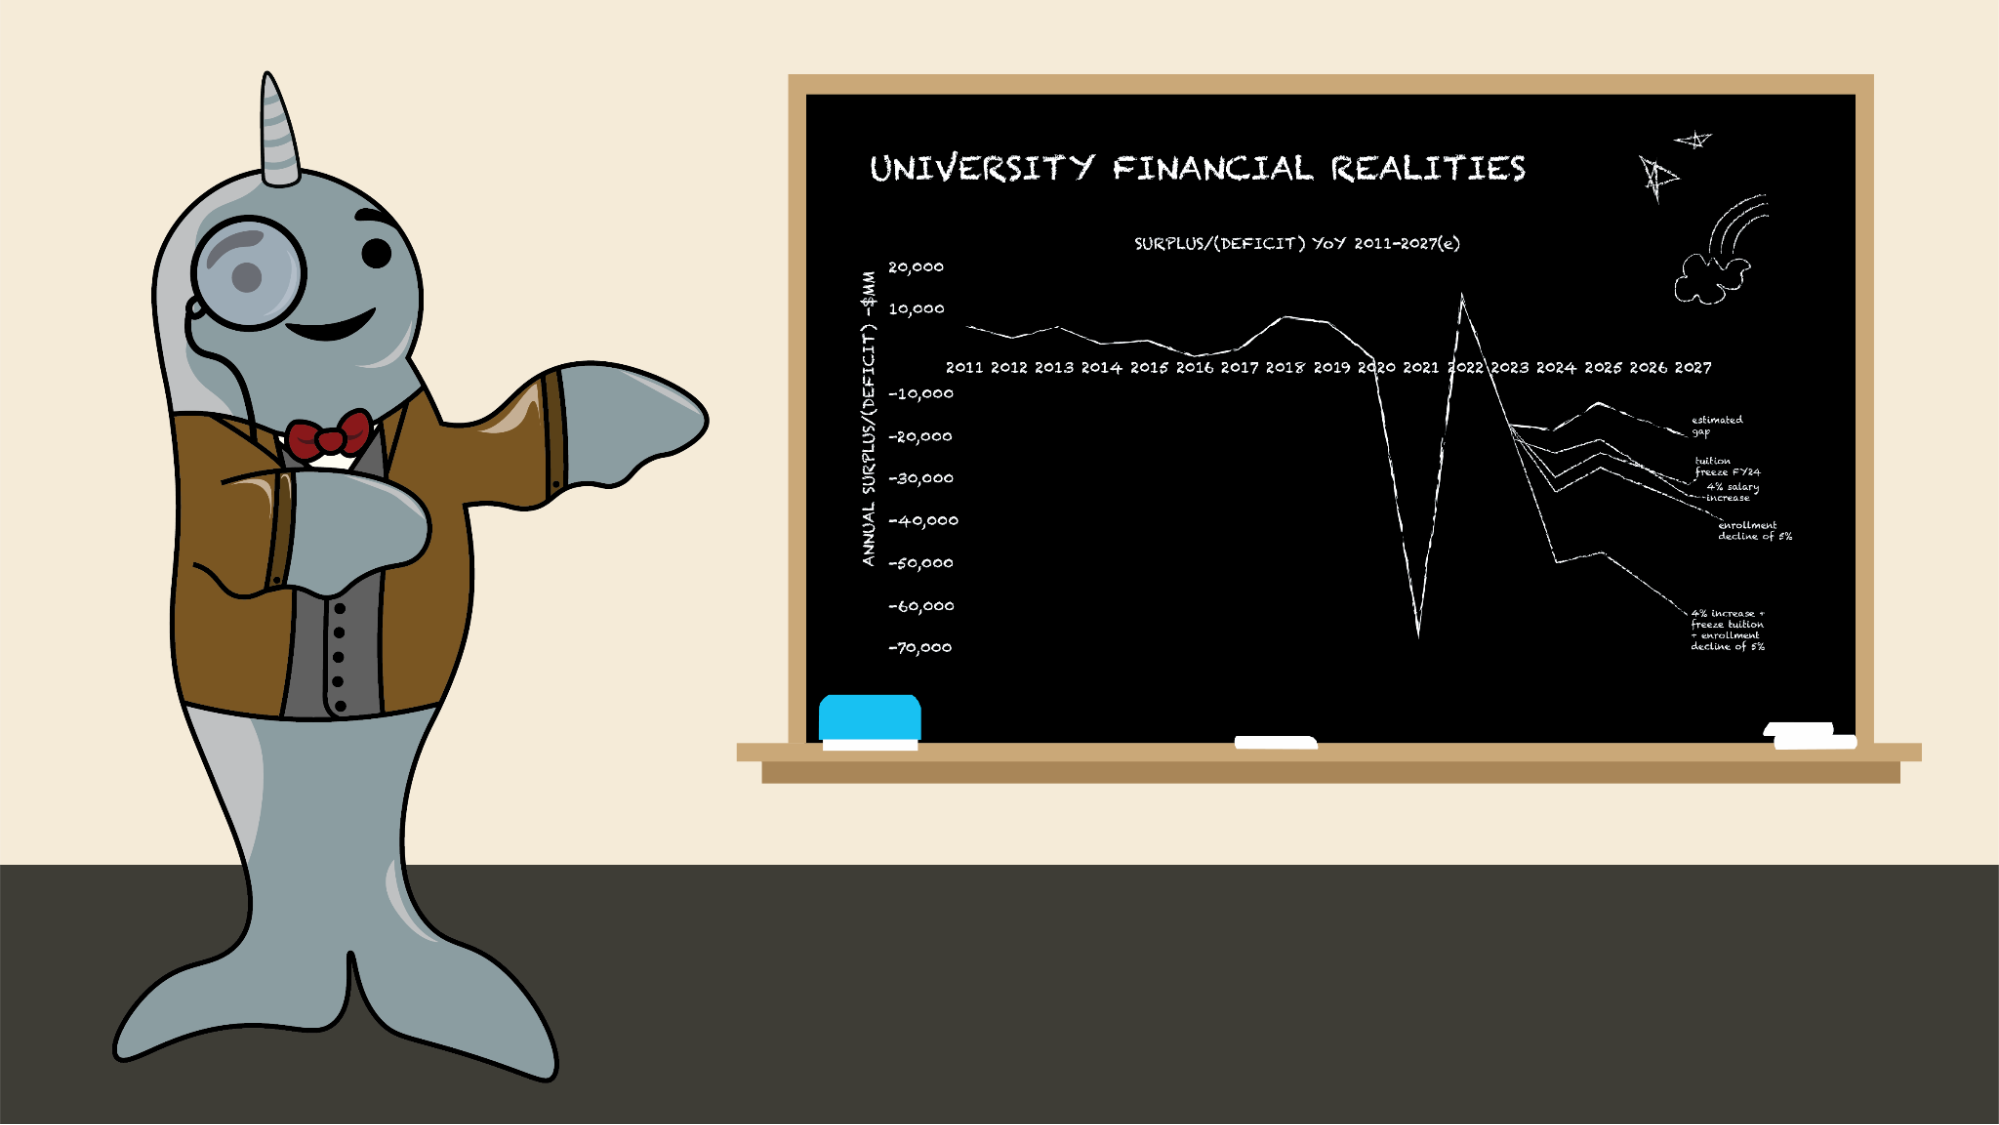 illustration of a smiling Gnarls the Narwhal, dressed in a brown vest and a monocle, presenting a graph on a black chalkboard. Above the graph are the words “university financial realities.” The Graph itself is titled “Surplus/(Deficit) YoY 2011-2027 (e)”. The graph demonstrates a large estimated budget deficit for the years 2023-2027.